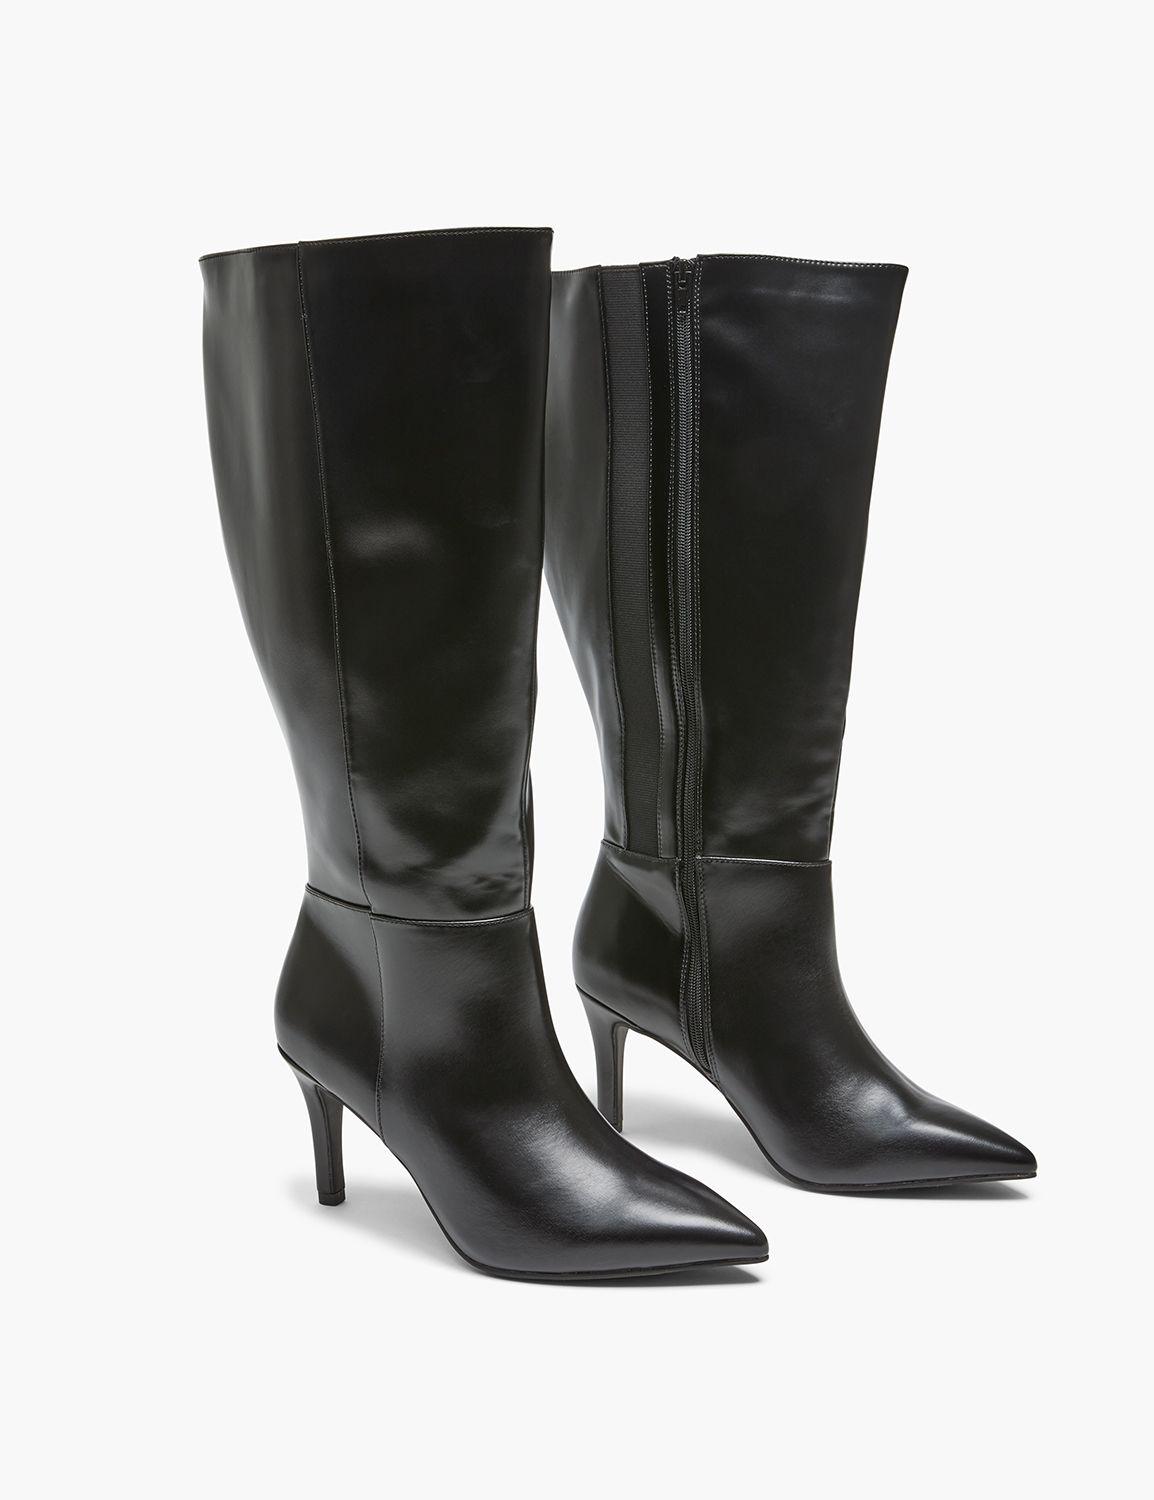 POINTED TOE TALL BOOT | LaneBryant